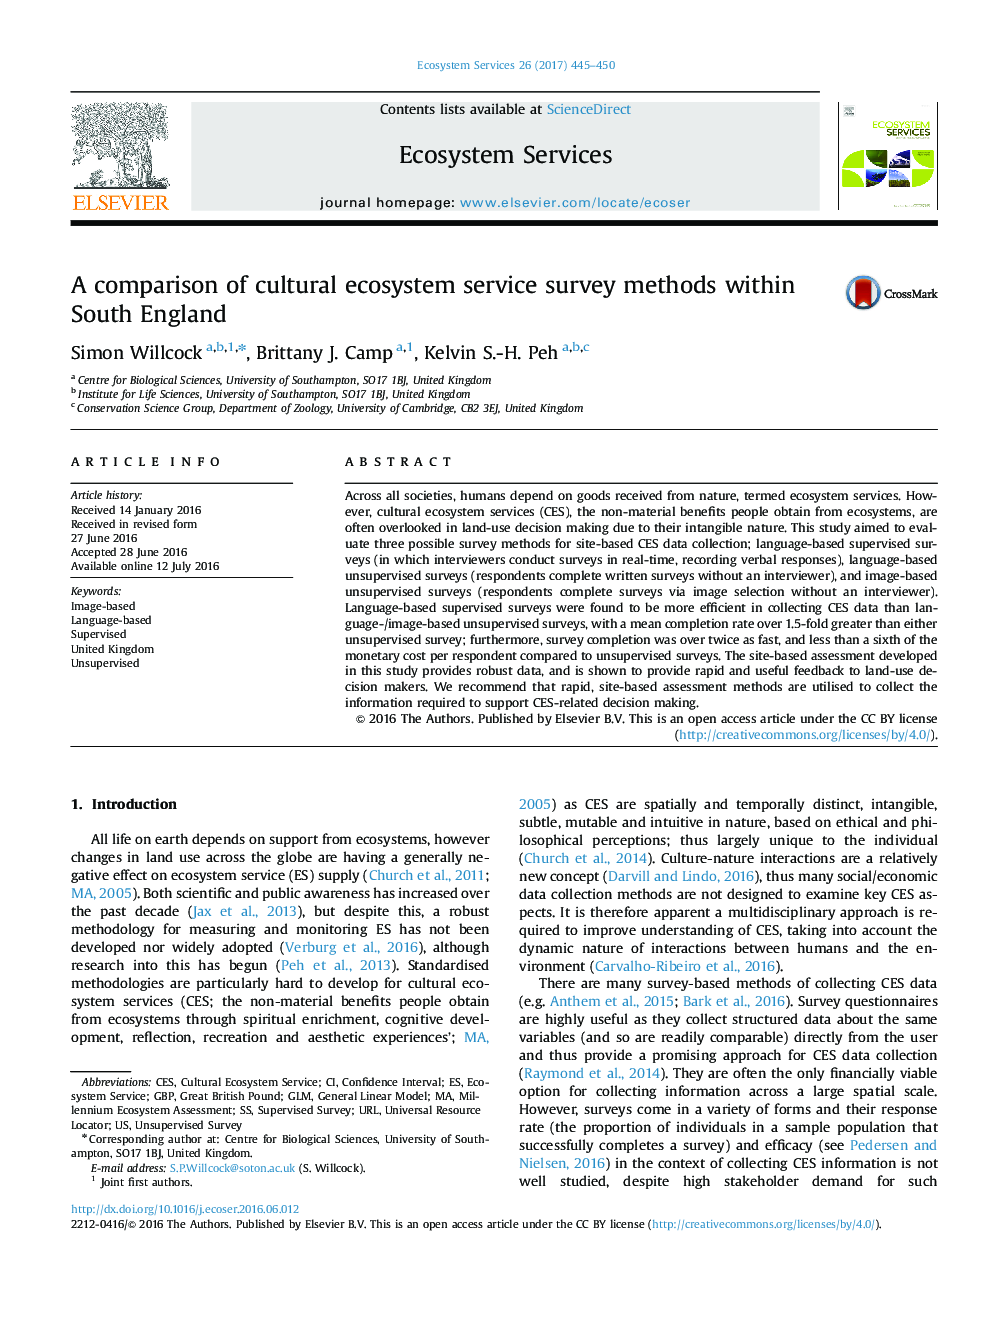 A comparison of cultural ecosystem service survey methods within South England